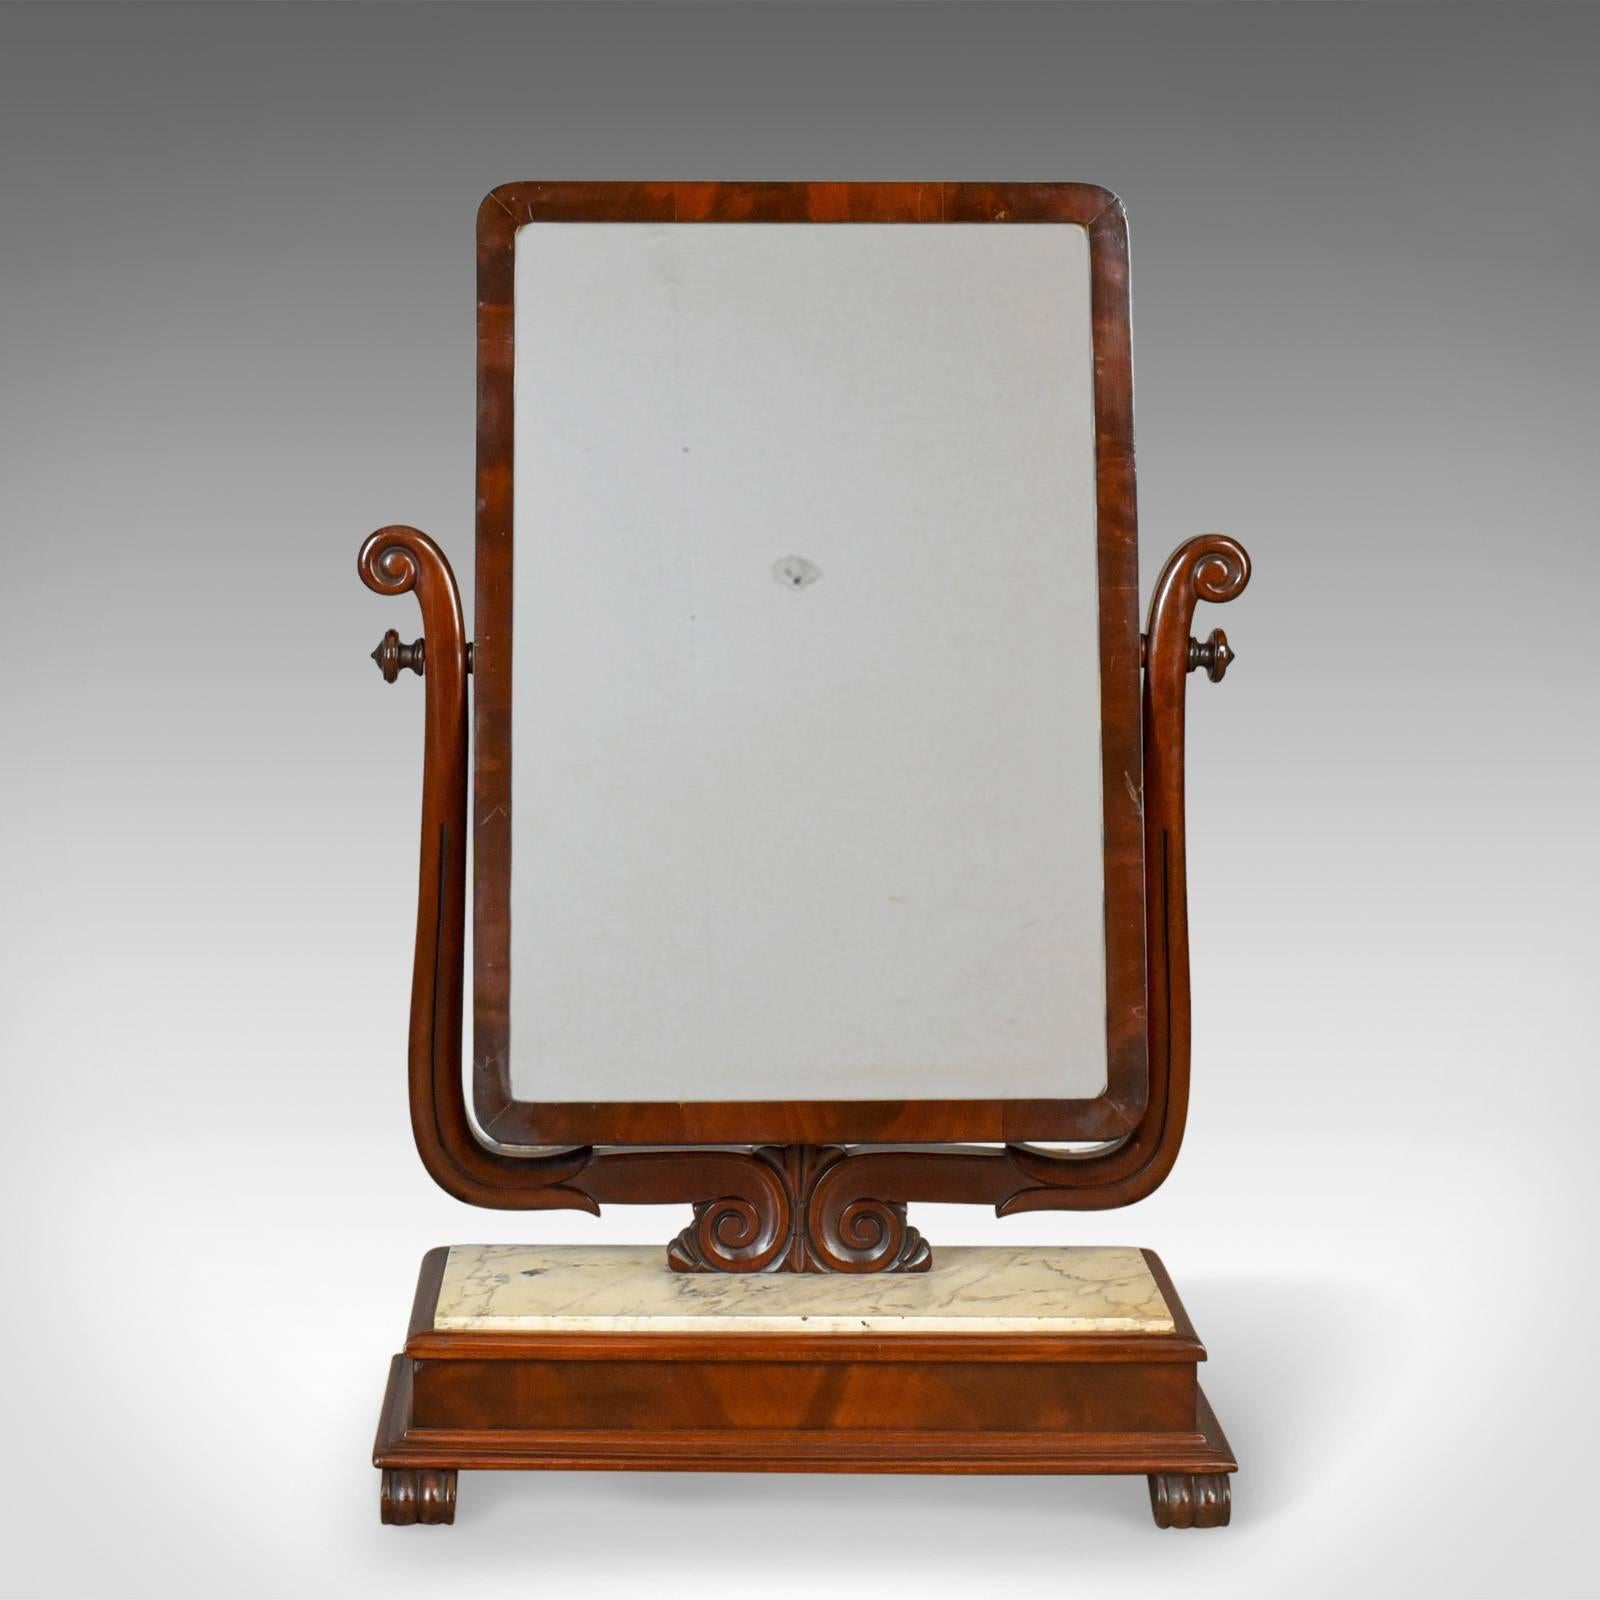 This is a large antique vanity mirror, a toilet or swing mirror, English, Victorian with a marble plinth dating to circa 1850.

A gorgeous and unusual example of a Victorian dressing mirror
In mahogany and complimented by the well veined marble